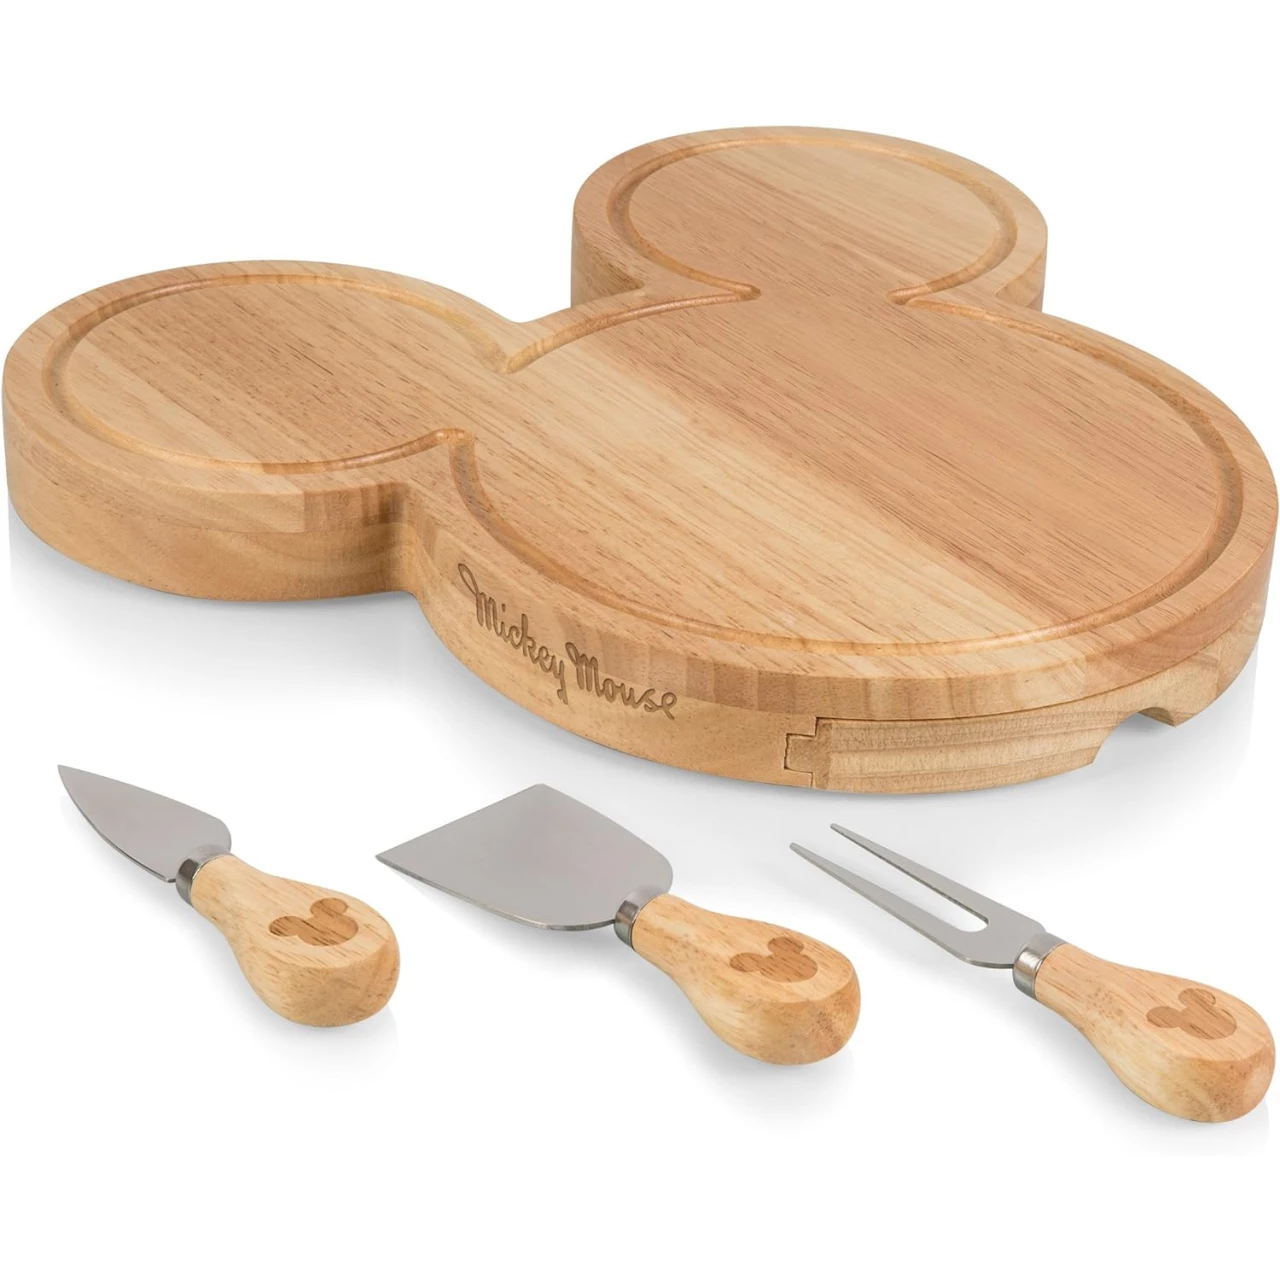 TOSCANA Disney Mickey Mouse Head Shaped Cheese Board and Knife Set, Charcuterie Board Set, Wood Cutting Board with Cheese Knives (Parawood)